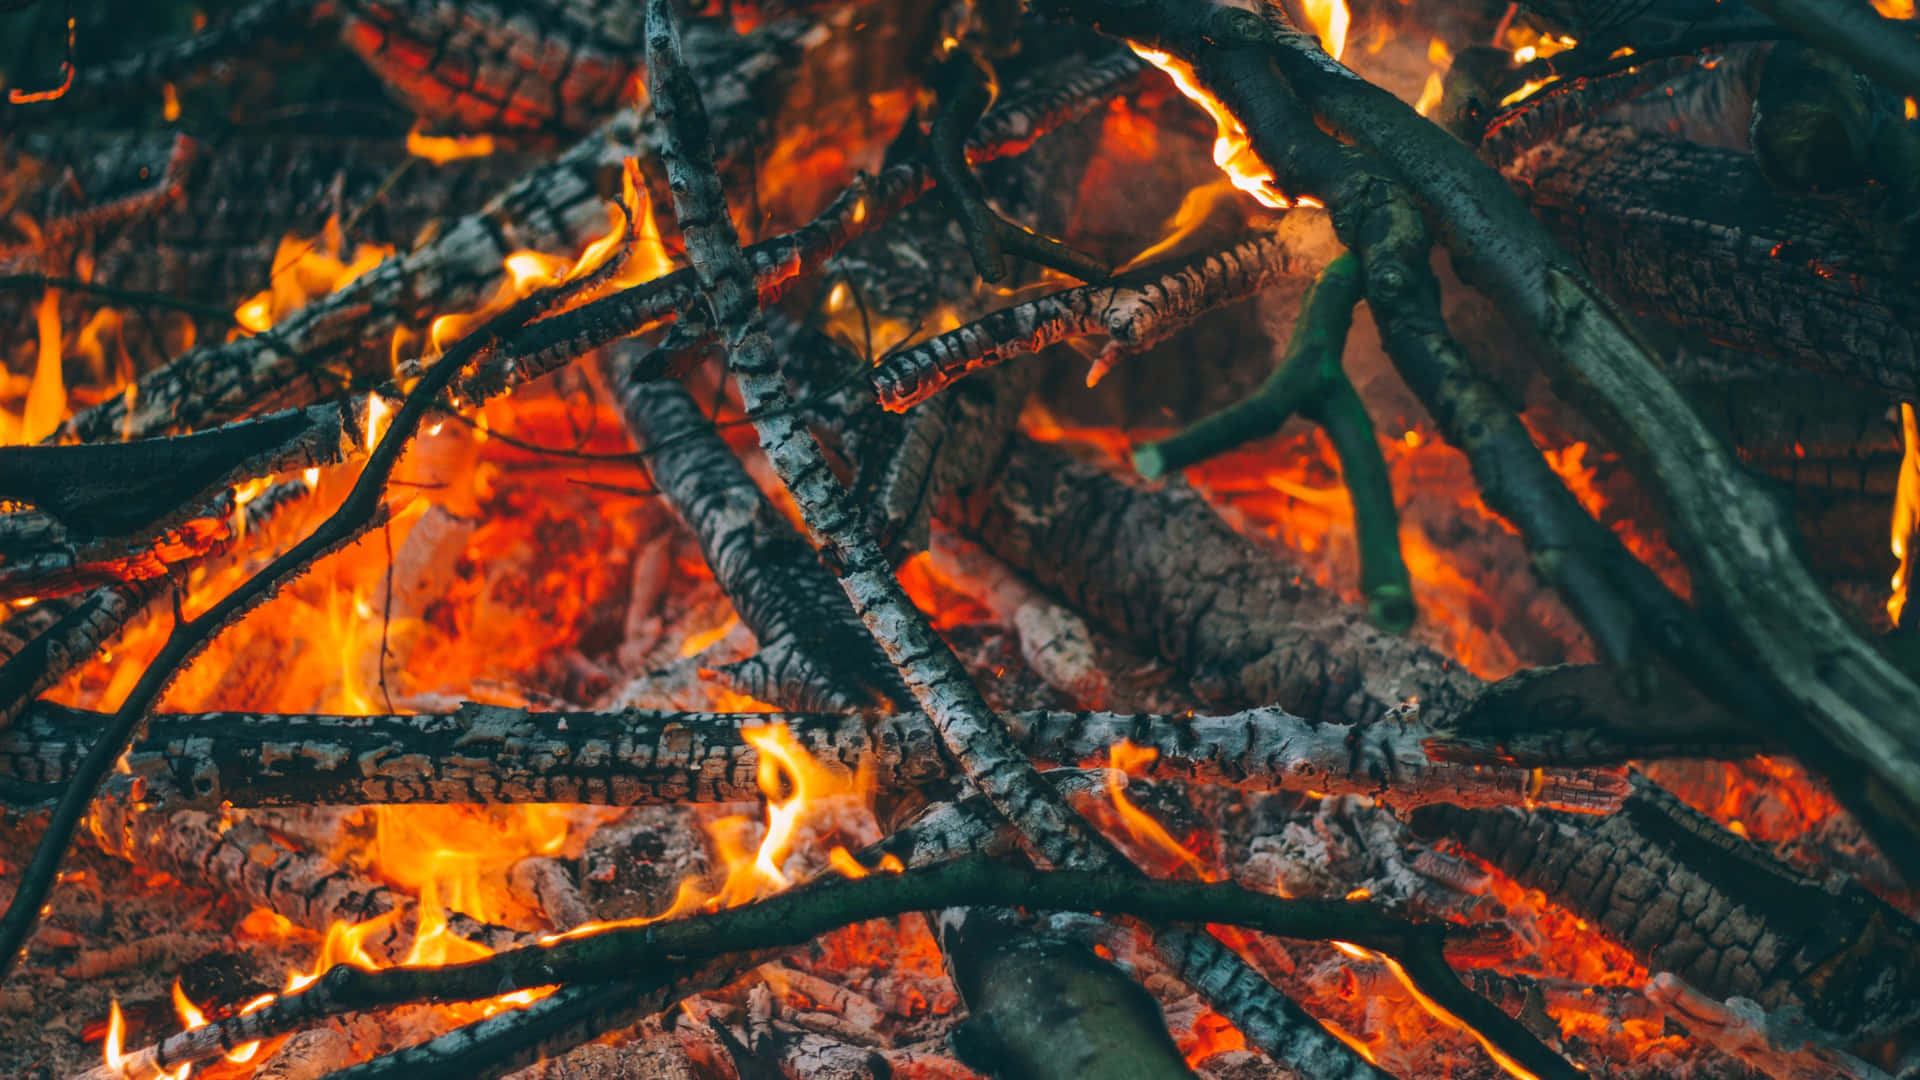 A Close Up Of A Fire With Branches And Sticks